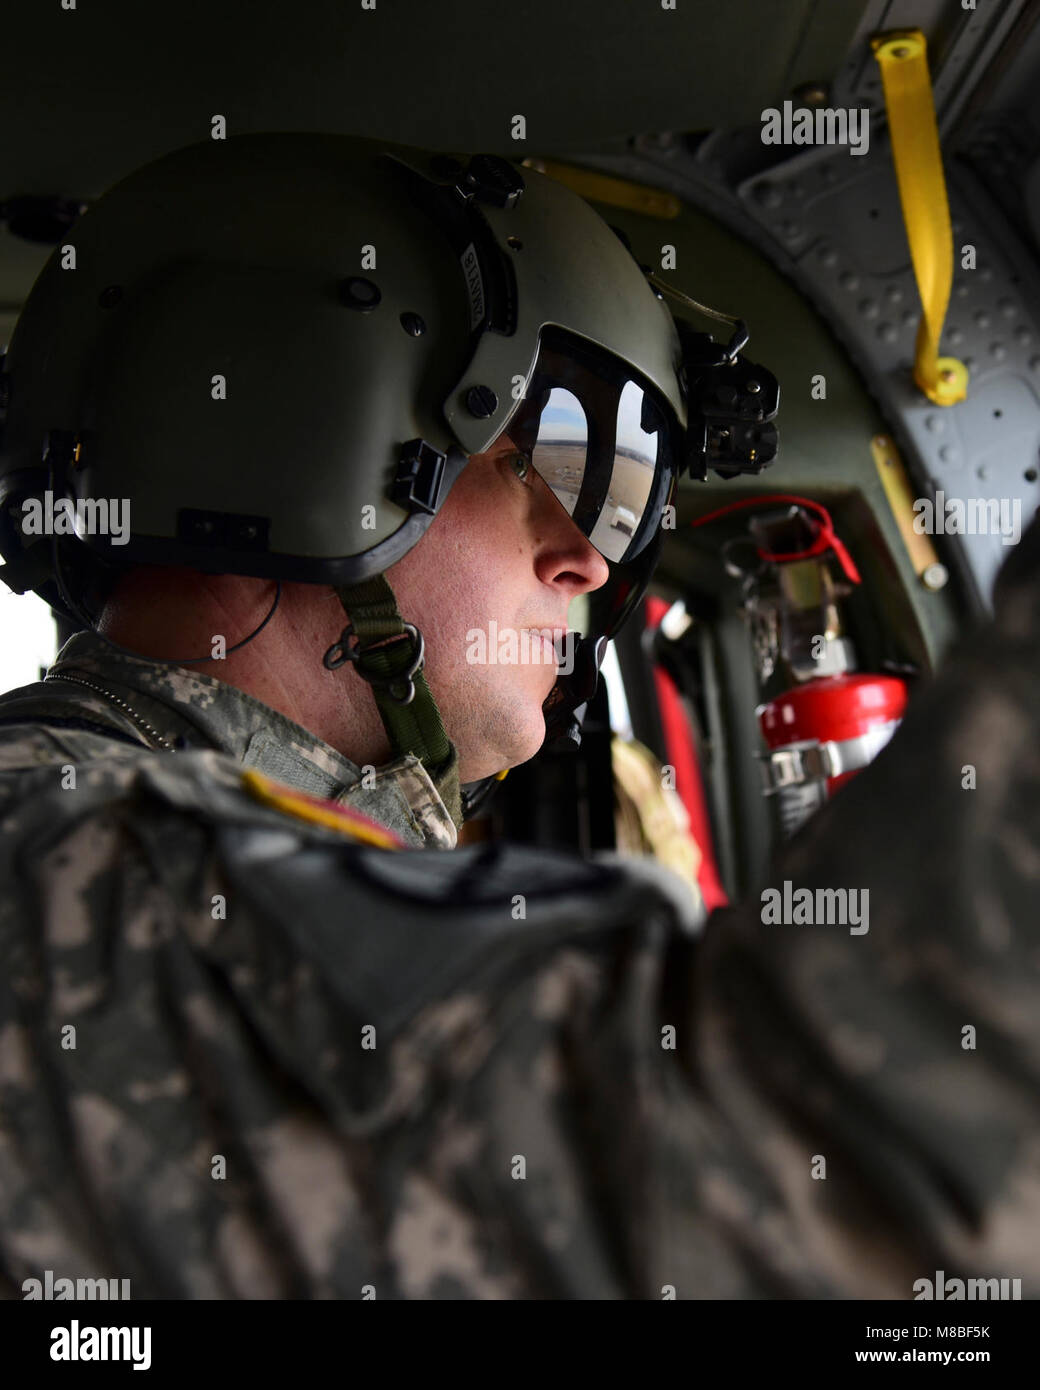 A U.S. Army crew chief with the 1-135th Assault Helicopter Battalion looks out a window of a UH-60 Black Hawk during a joint training mission at Whiteman Air Force Base, Mo., Jan. 31, 2018. In addition to establishing a partnership, the purpose of the training was to familiarize Joint Terminal Attack Controllers from the 7th Air Support Operations Squadron, located in Fort Bliss, Texas, with the assets available at Whiteman AFB that are used in a multi-domain fight. (U.S. Air Force Stock Photo